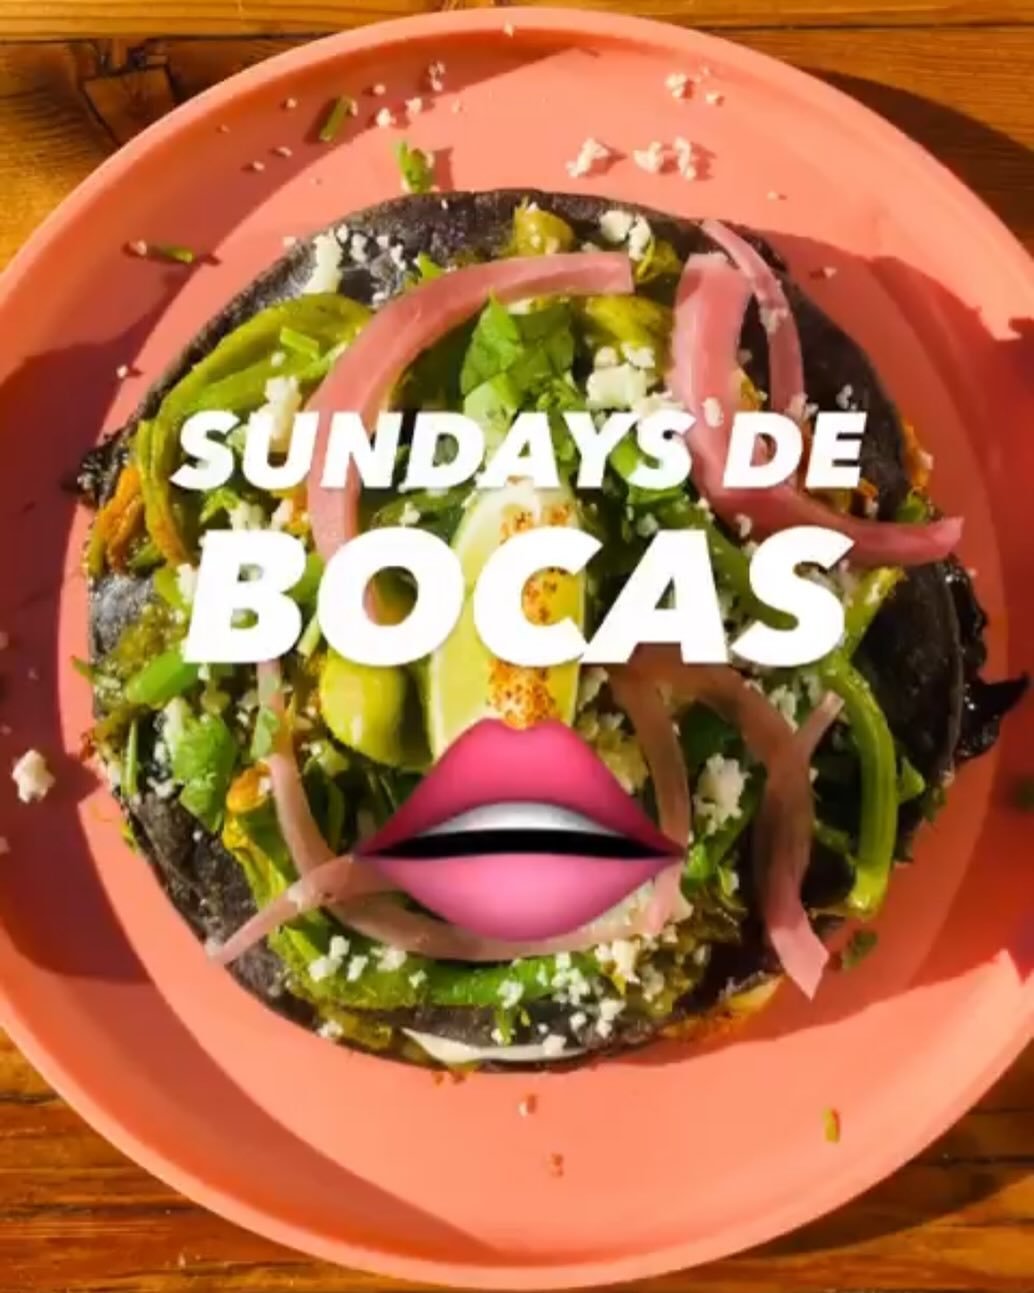 Our Sunday De Bocas Tapas menu starts in 15 minutes! 

Dive into our Chef&rsquo;s Specialty Tasting Menu, packed with mouthwatering flavors that&rsquo;ll make your taste buds do a happy dance. It&rsquo;s the best way to wrap up the weekend with aweso